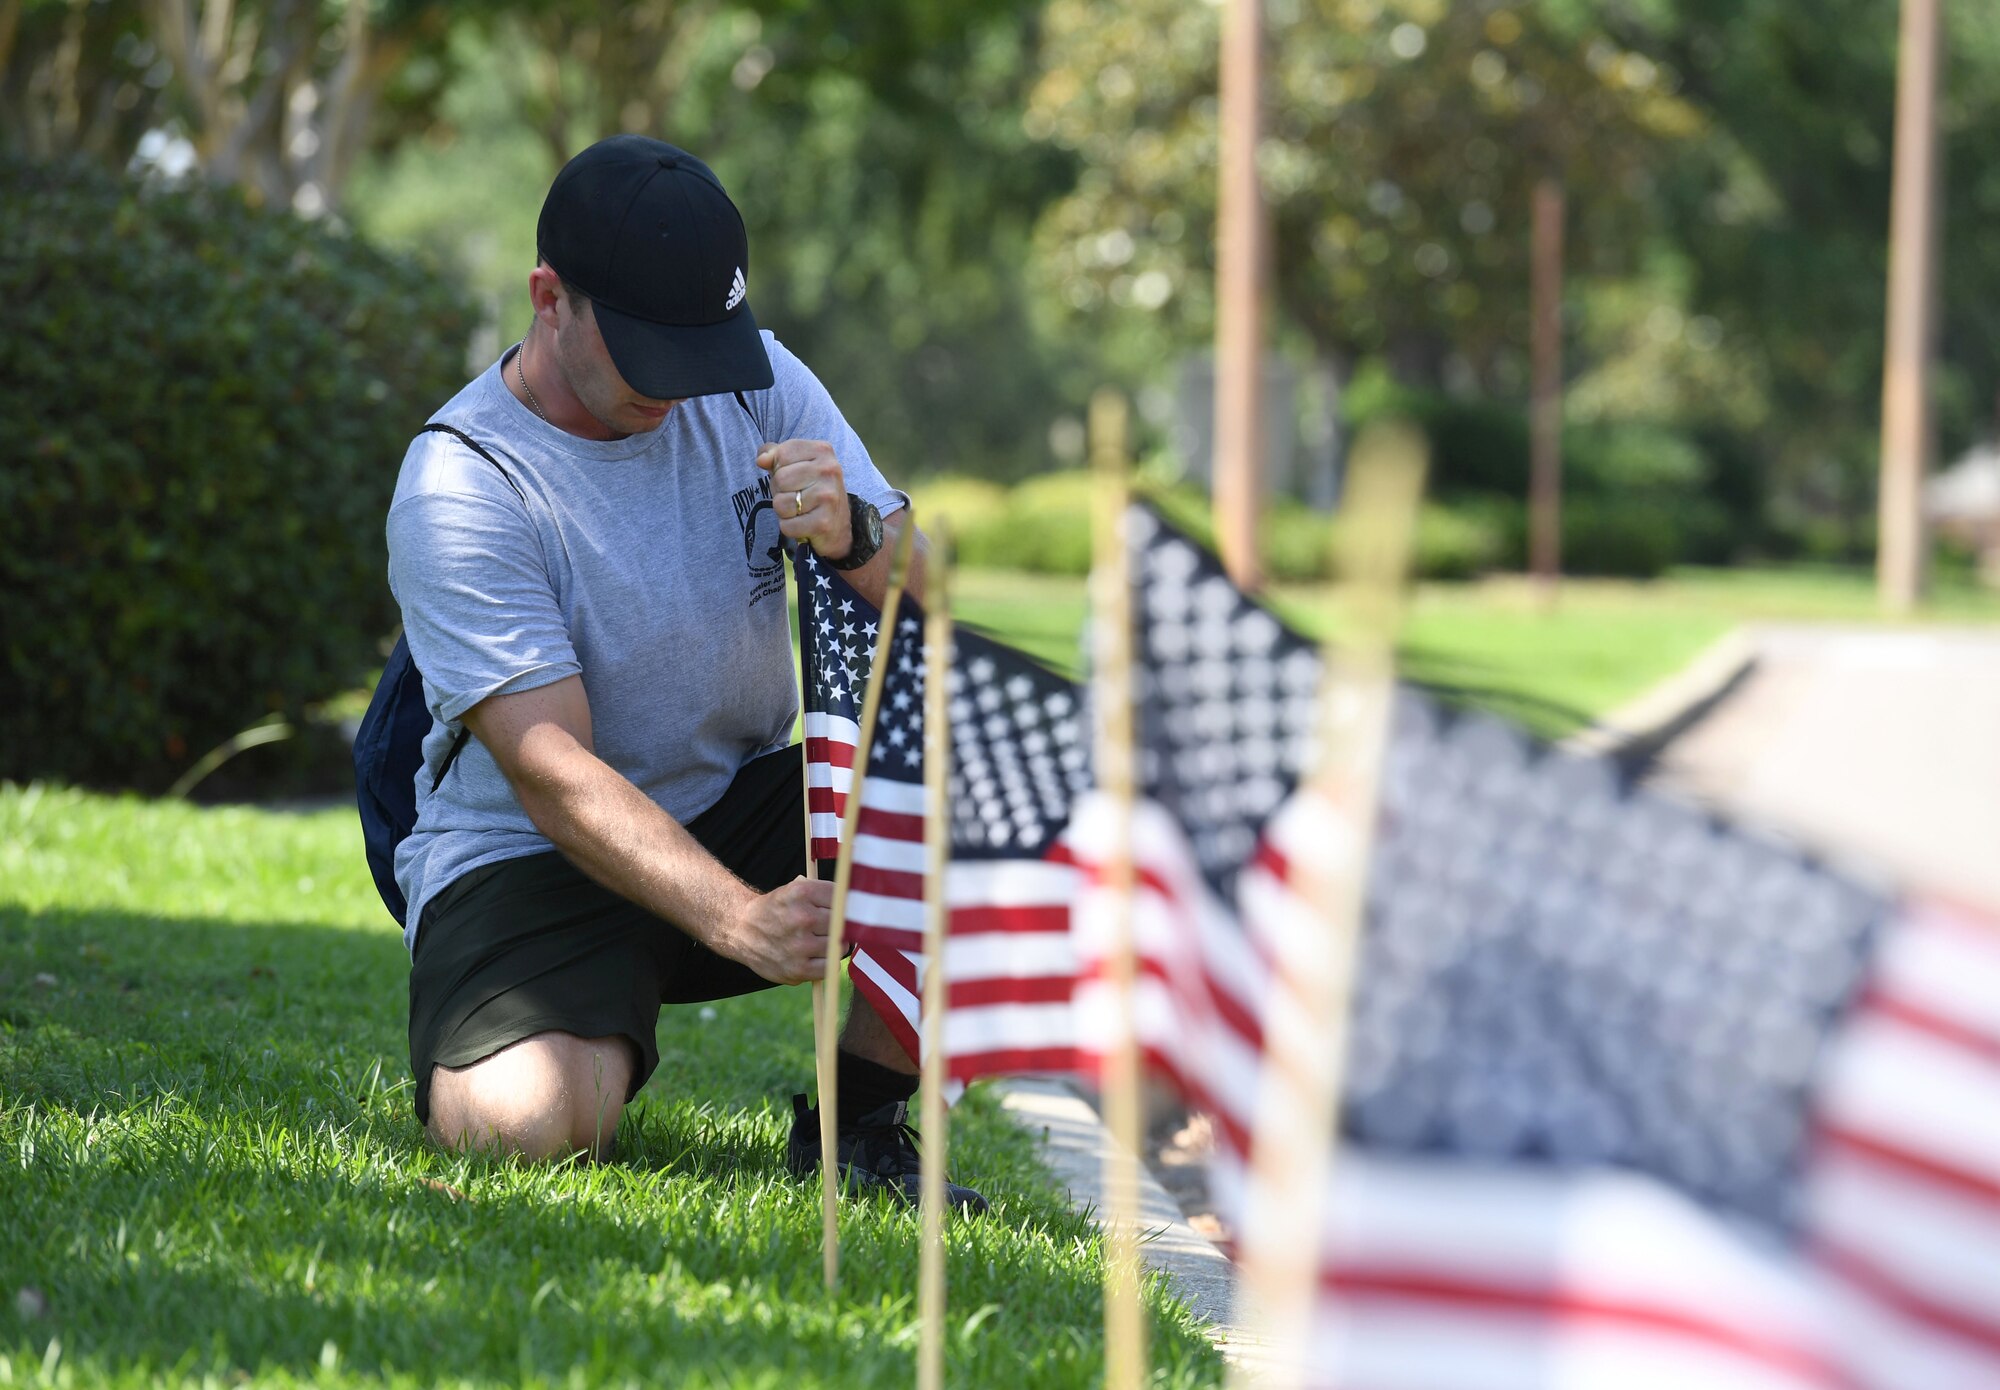 U.S. Air Force Airman 1st Class Michael Hanson, 338th Training Squadron student and member of the Air Force Sergeants Association Chapter 652, places a U.S. flag in the ground along Larcher Blvd. at Keesler Air Force Base, Mississippi, June 11, 2021. June 14 is Flag Day, a celebration of the history of the American flag and a time to remember proper etiquette for its display. Flag Day recognizes the adoption of the Stars and Stripes as the official flag of the United States 238 years ago on June 14, 1777, by the Continental Congress meeting in Philadelphia. (U.S. Air Force photo by Kemberly Groue)